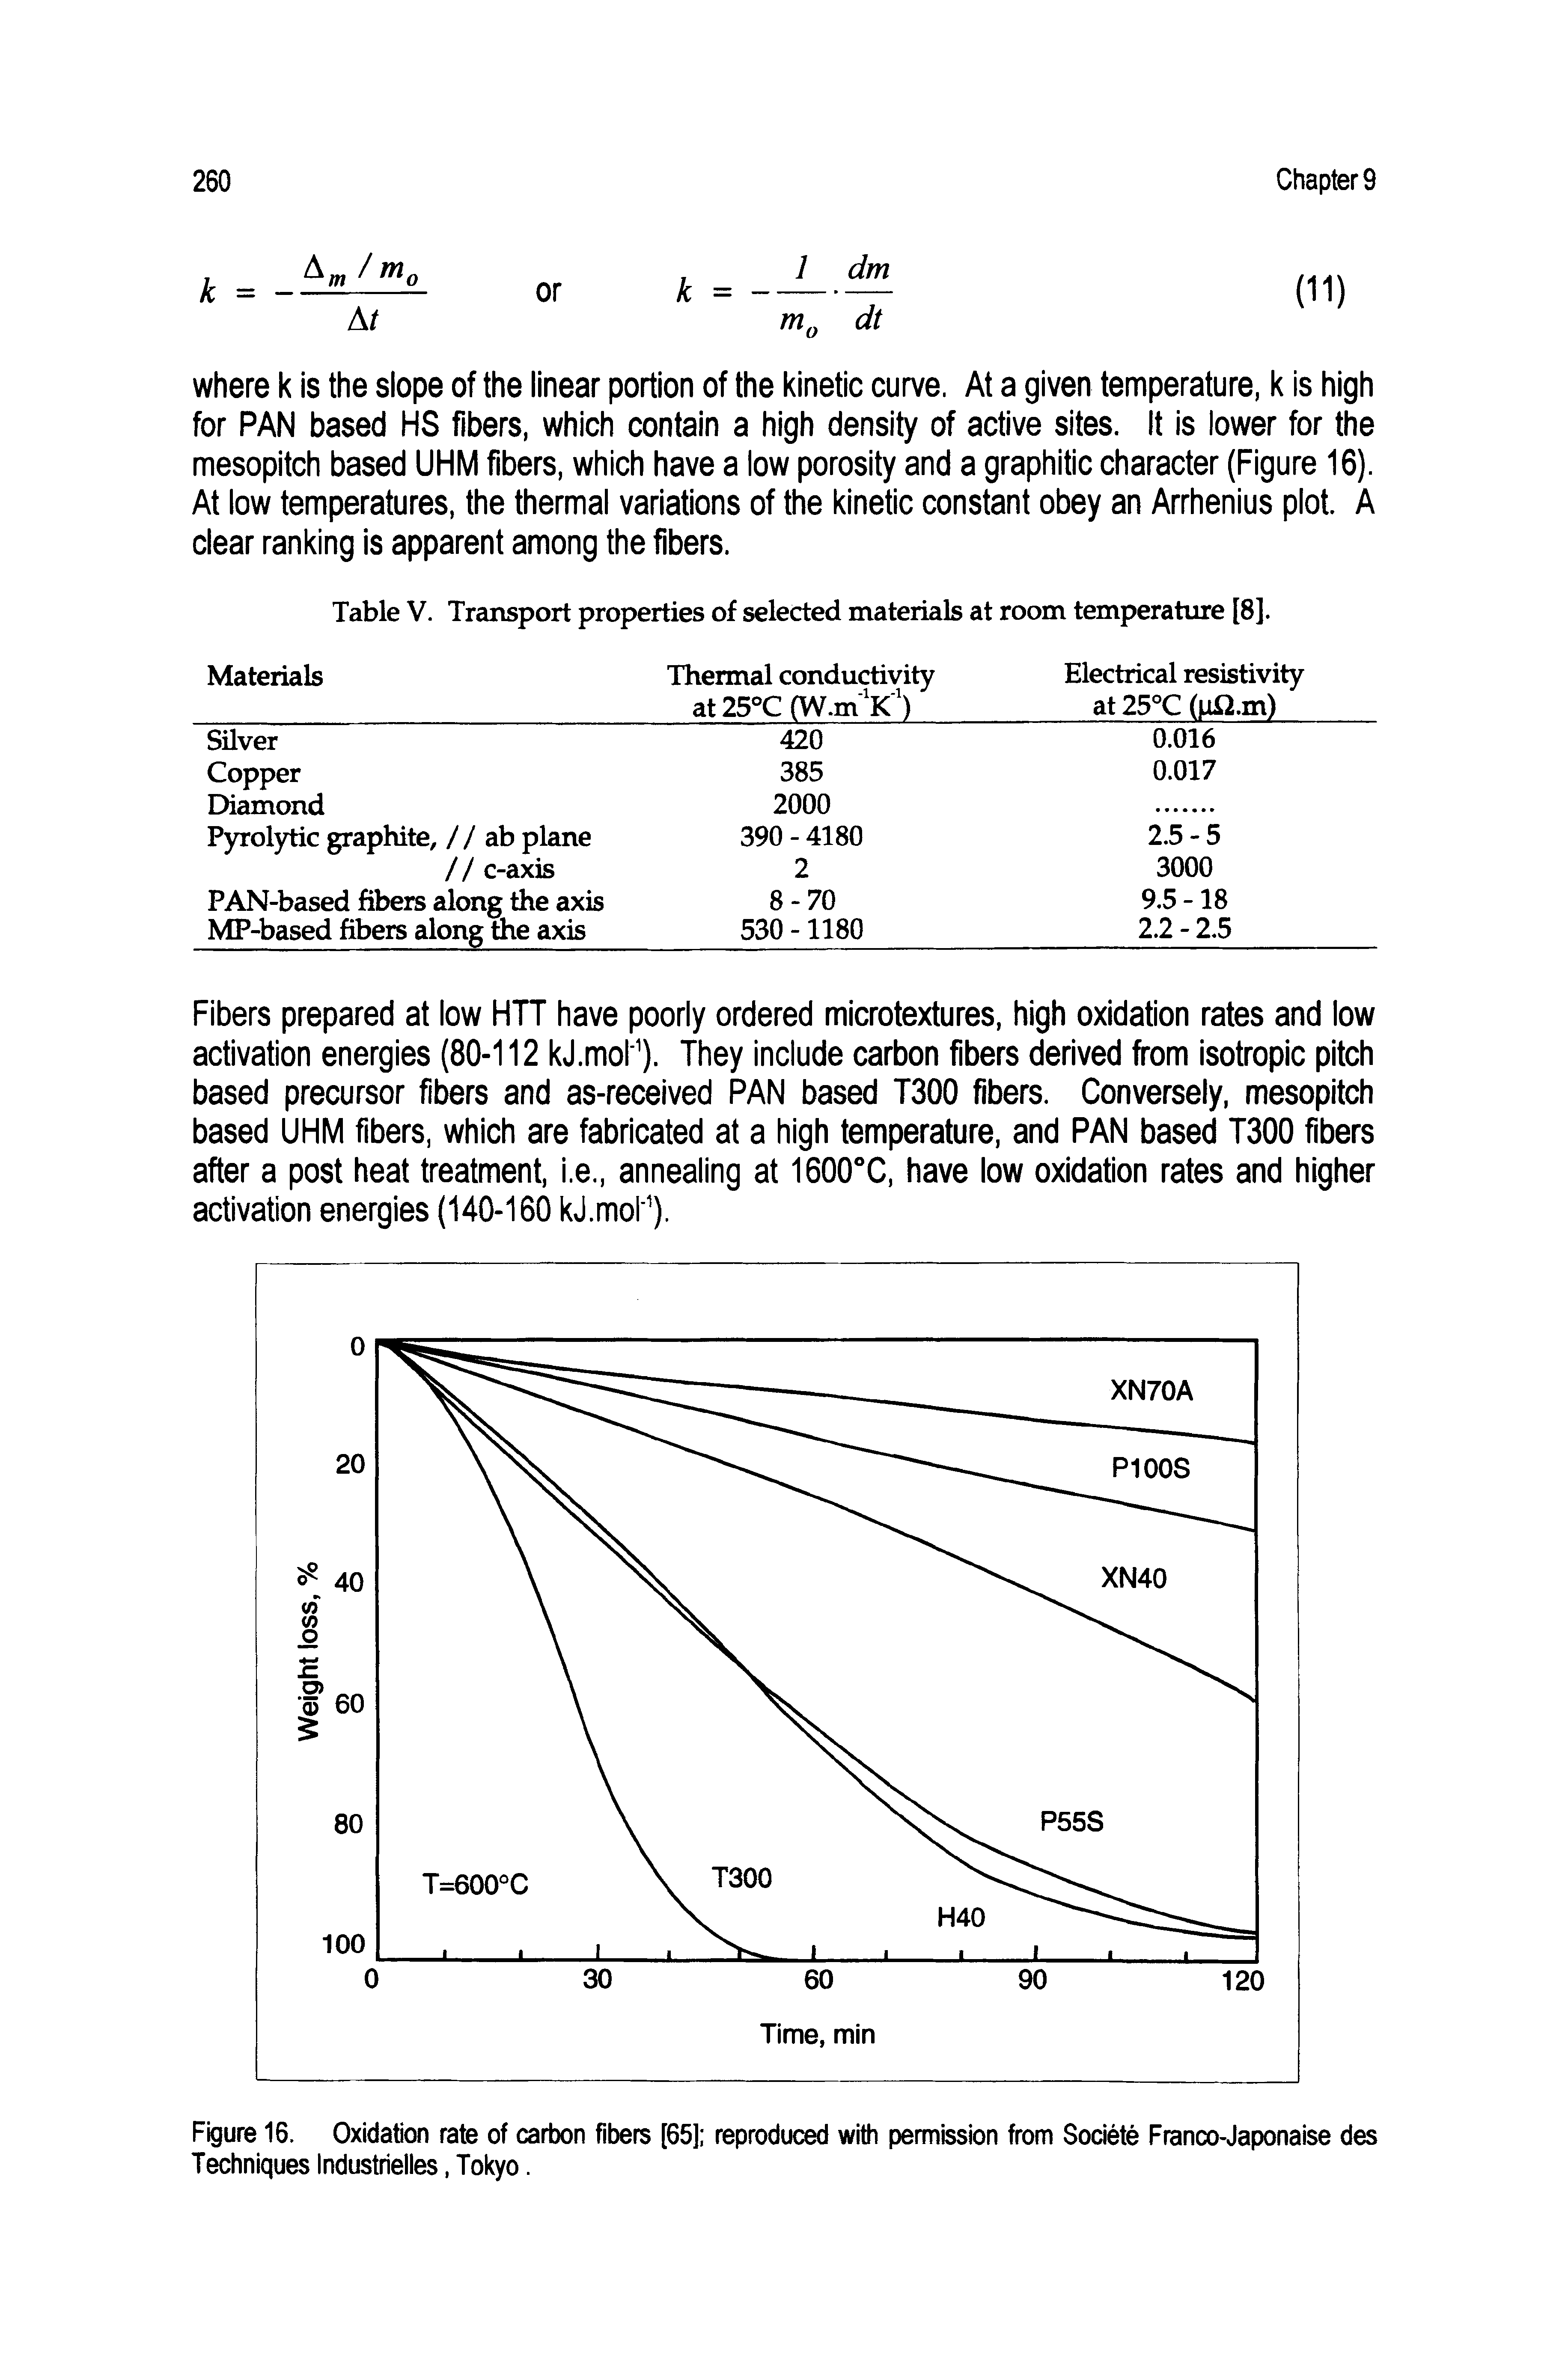 Table V. Transport properties of selected materials at room temperature [8].